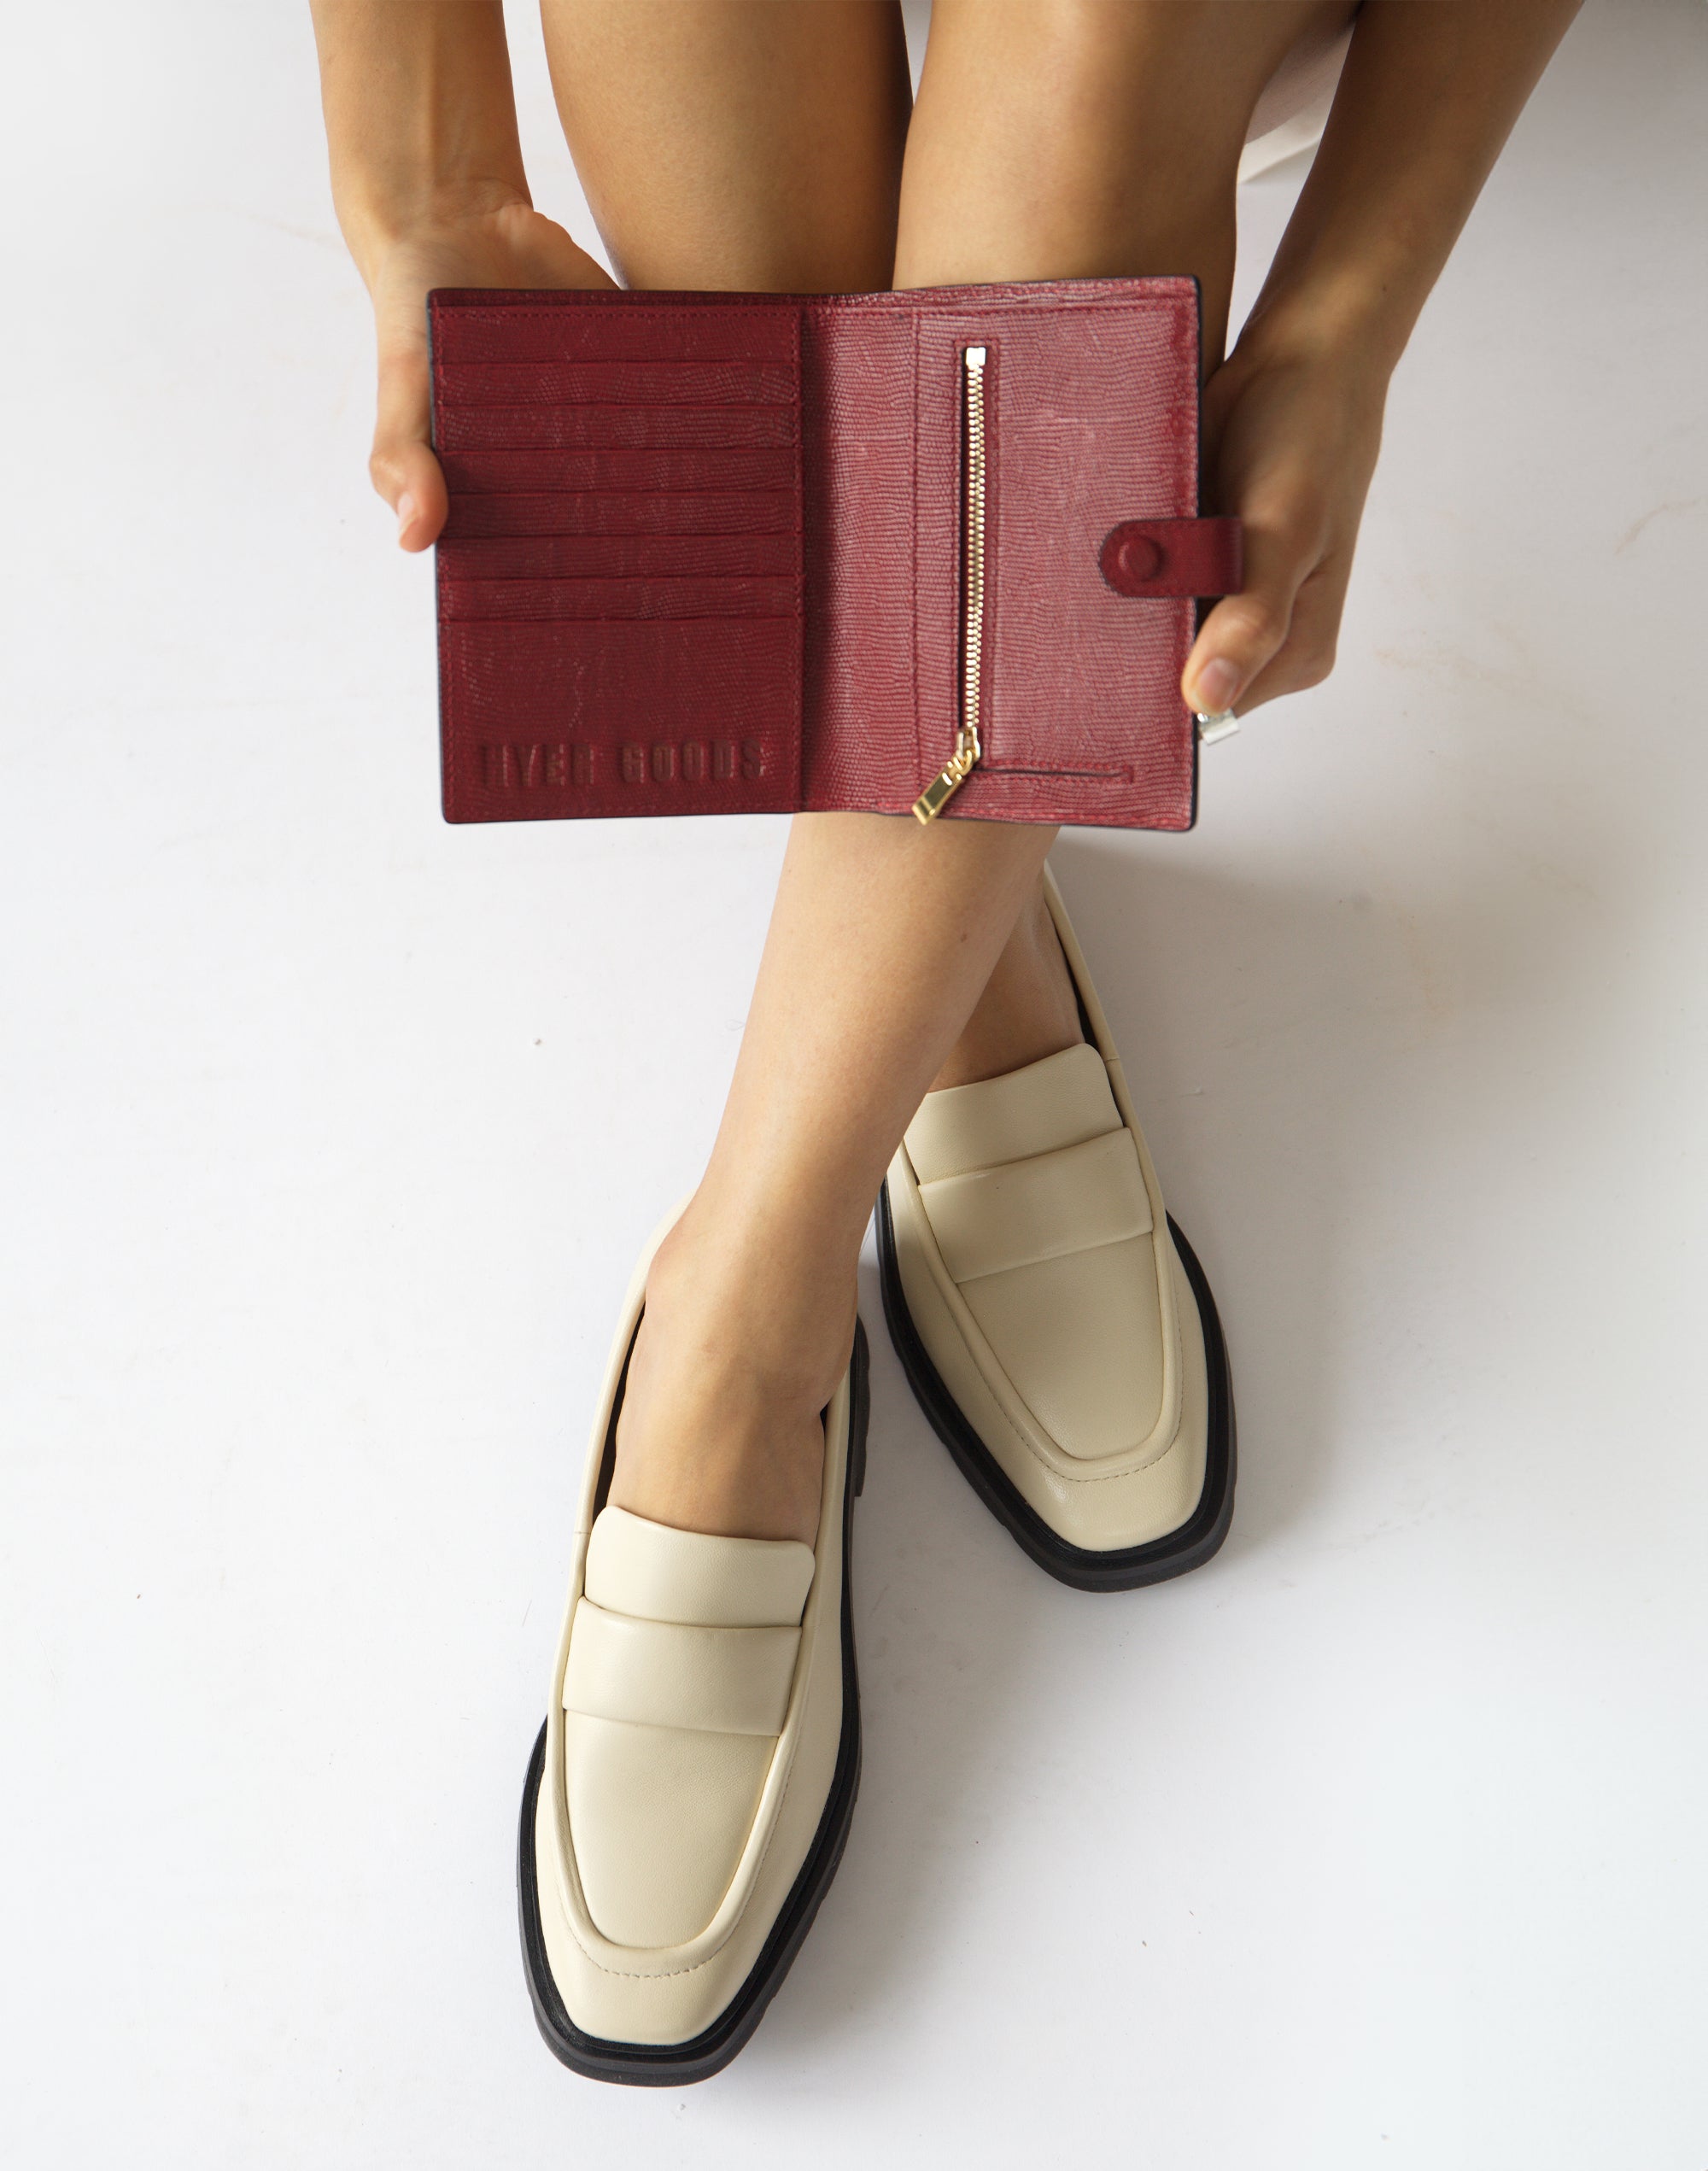 an overhead shot of someones shins, with a cherry red lizard wallet open on top with card pockets on the left and a gold zipper on the right